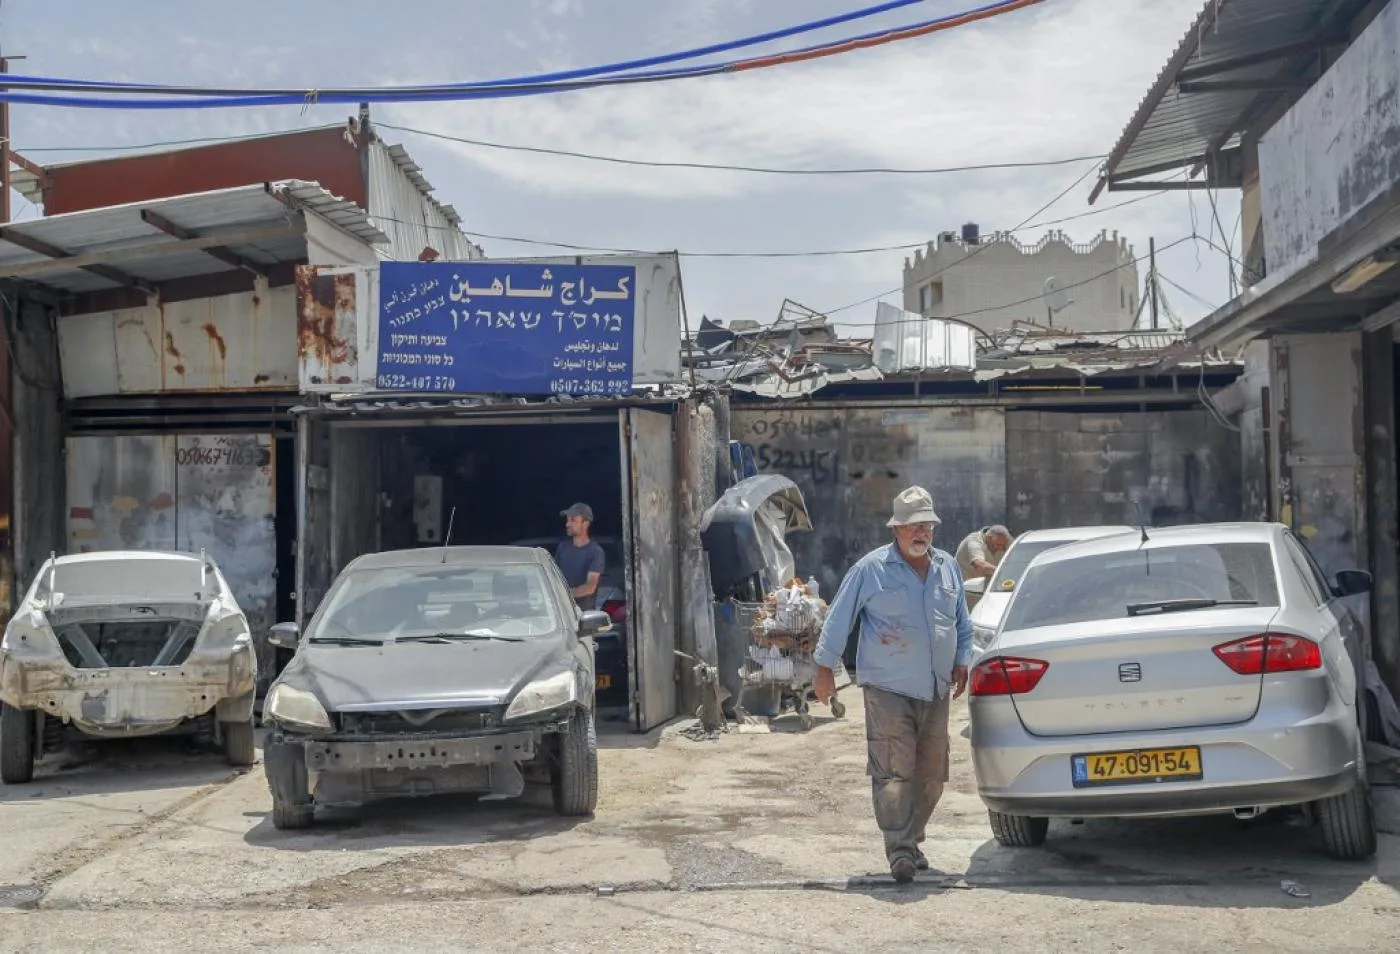 Palestinian auto body technician Khaled Shaheen (R) works at his shop in the neighbourhood of Wadi al-Joz in occupied east Jerusalem, on June 4, 2020